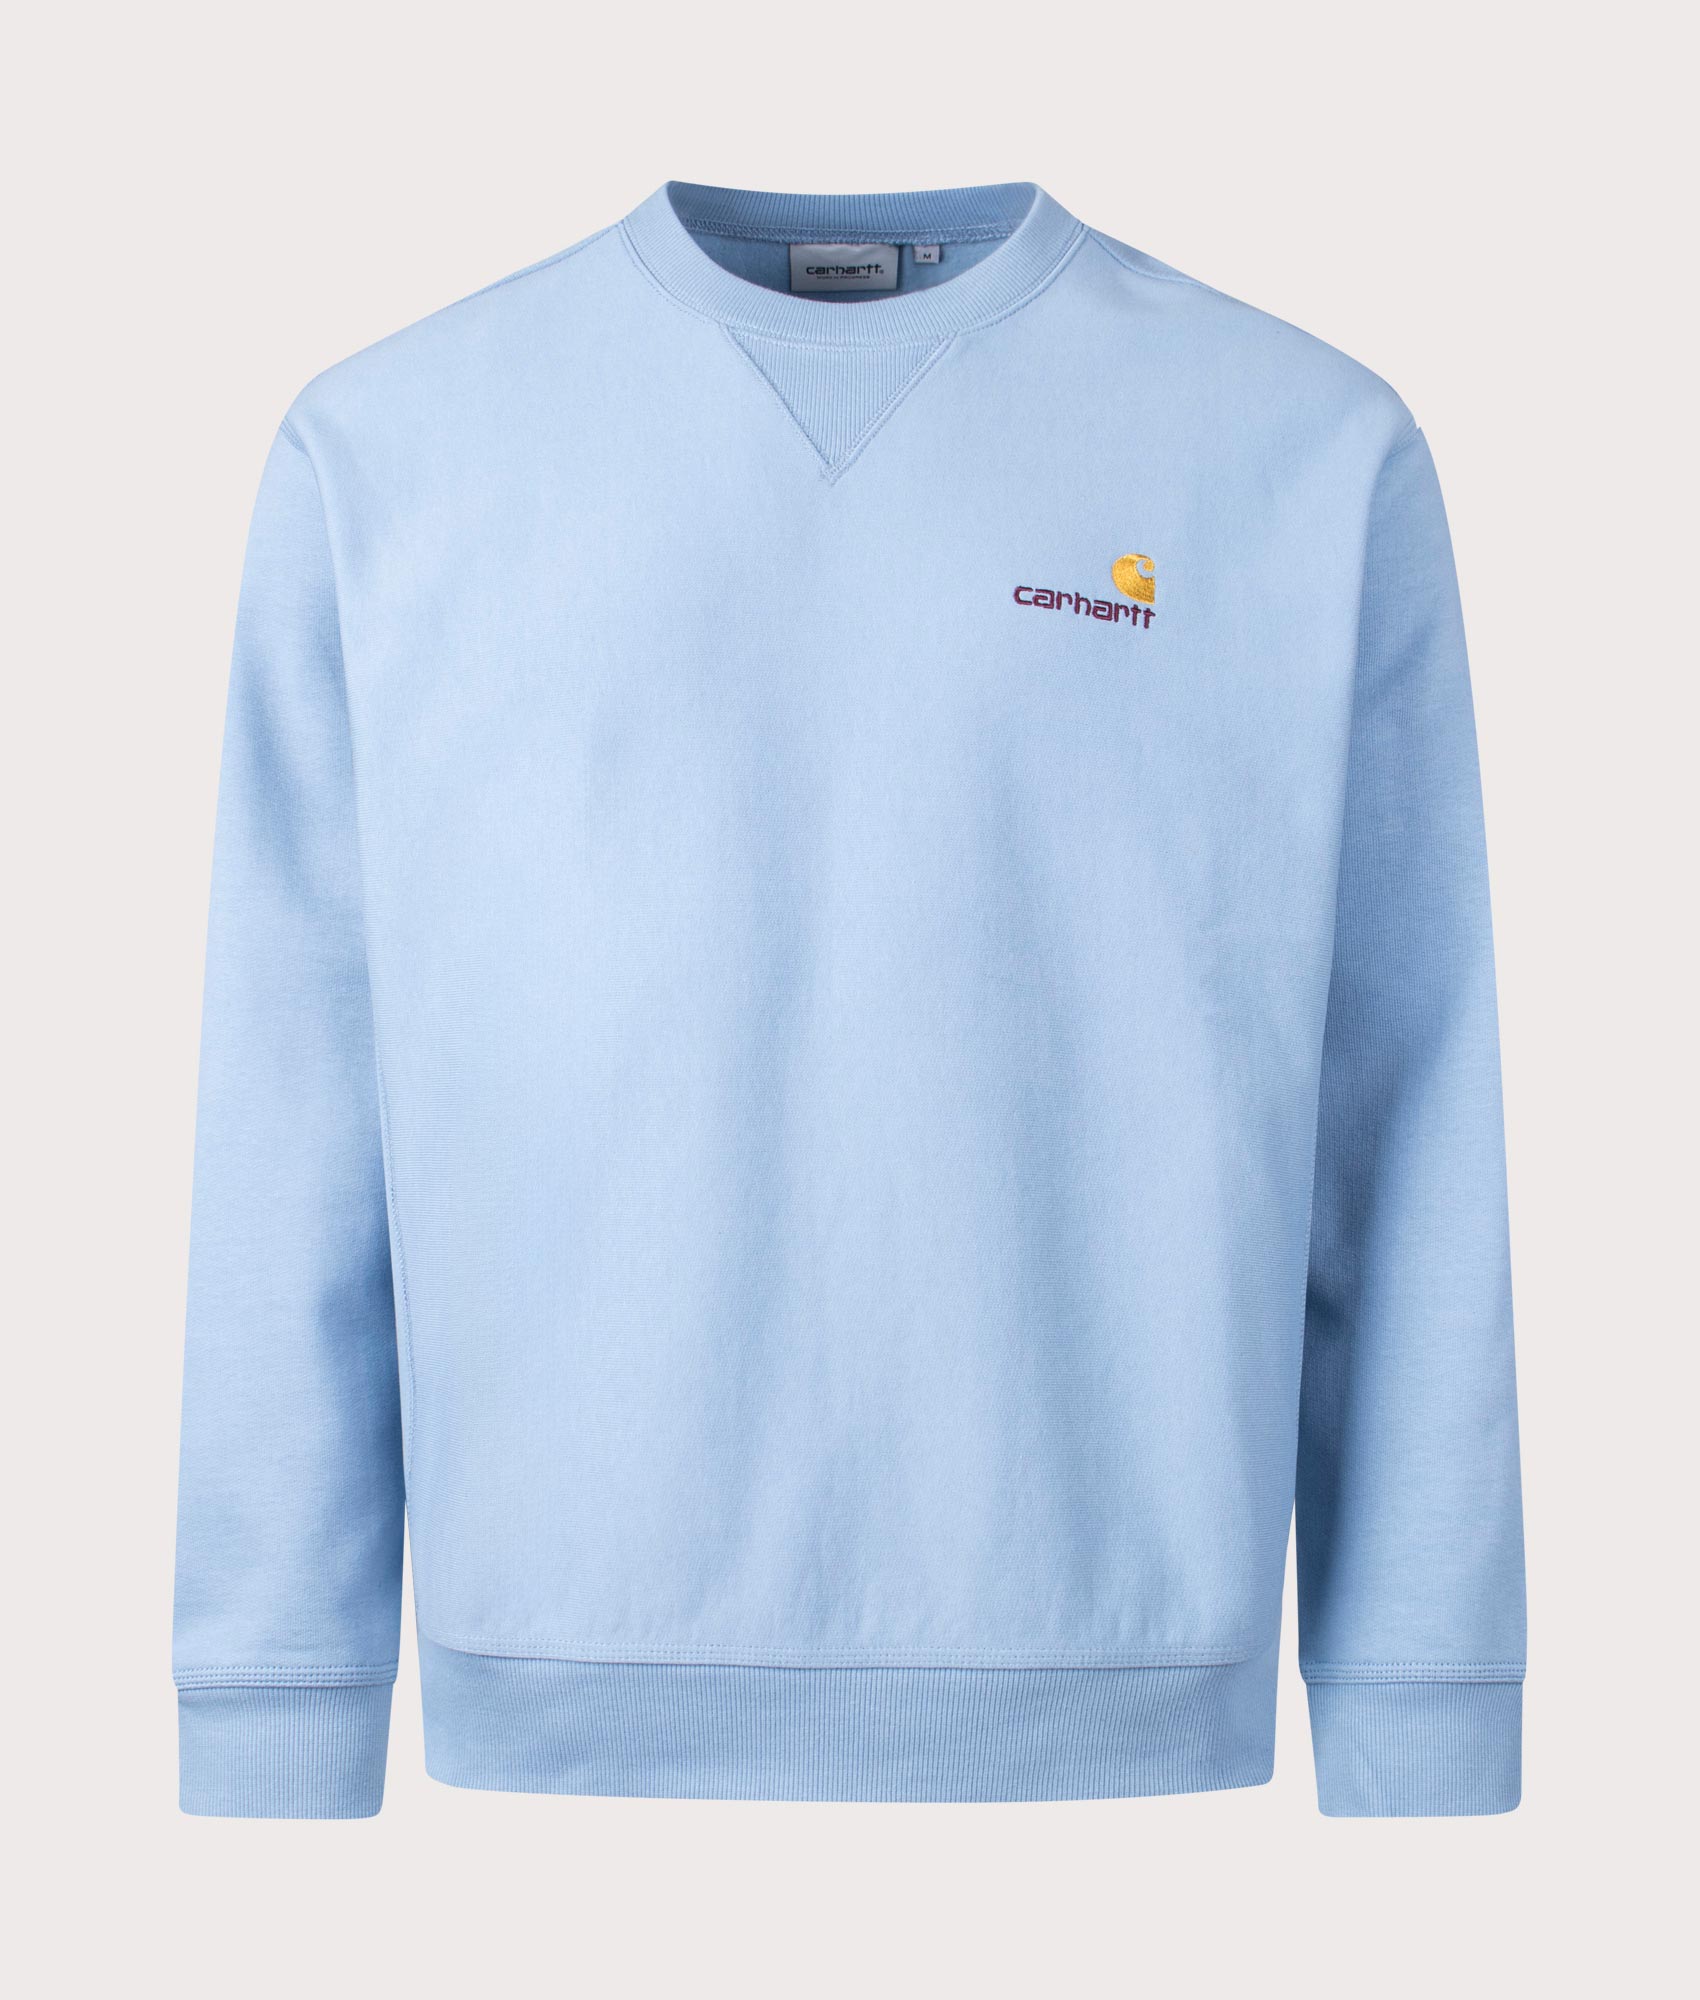 Carhartt WIP Mens Relaxed Fit American Script Sweatshirt - Colour: 0F4XX Frosted Blue - Size: Medium